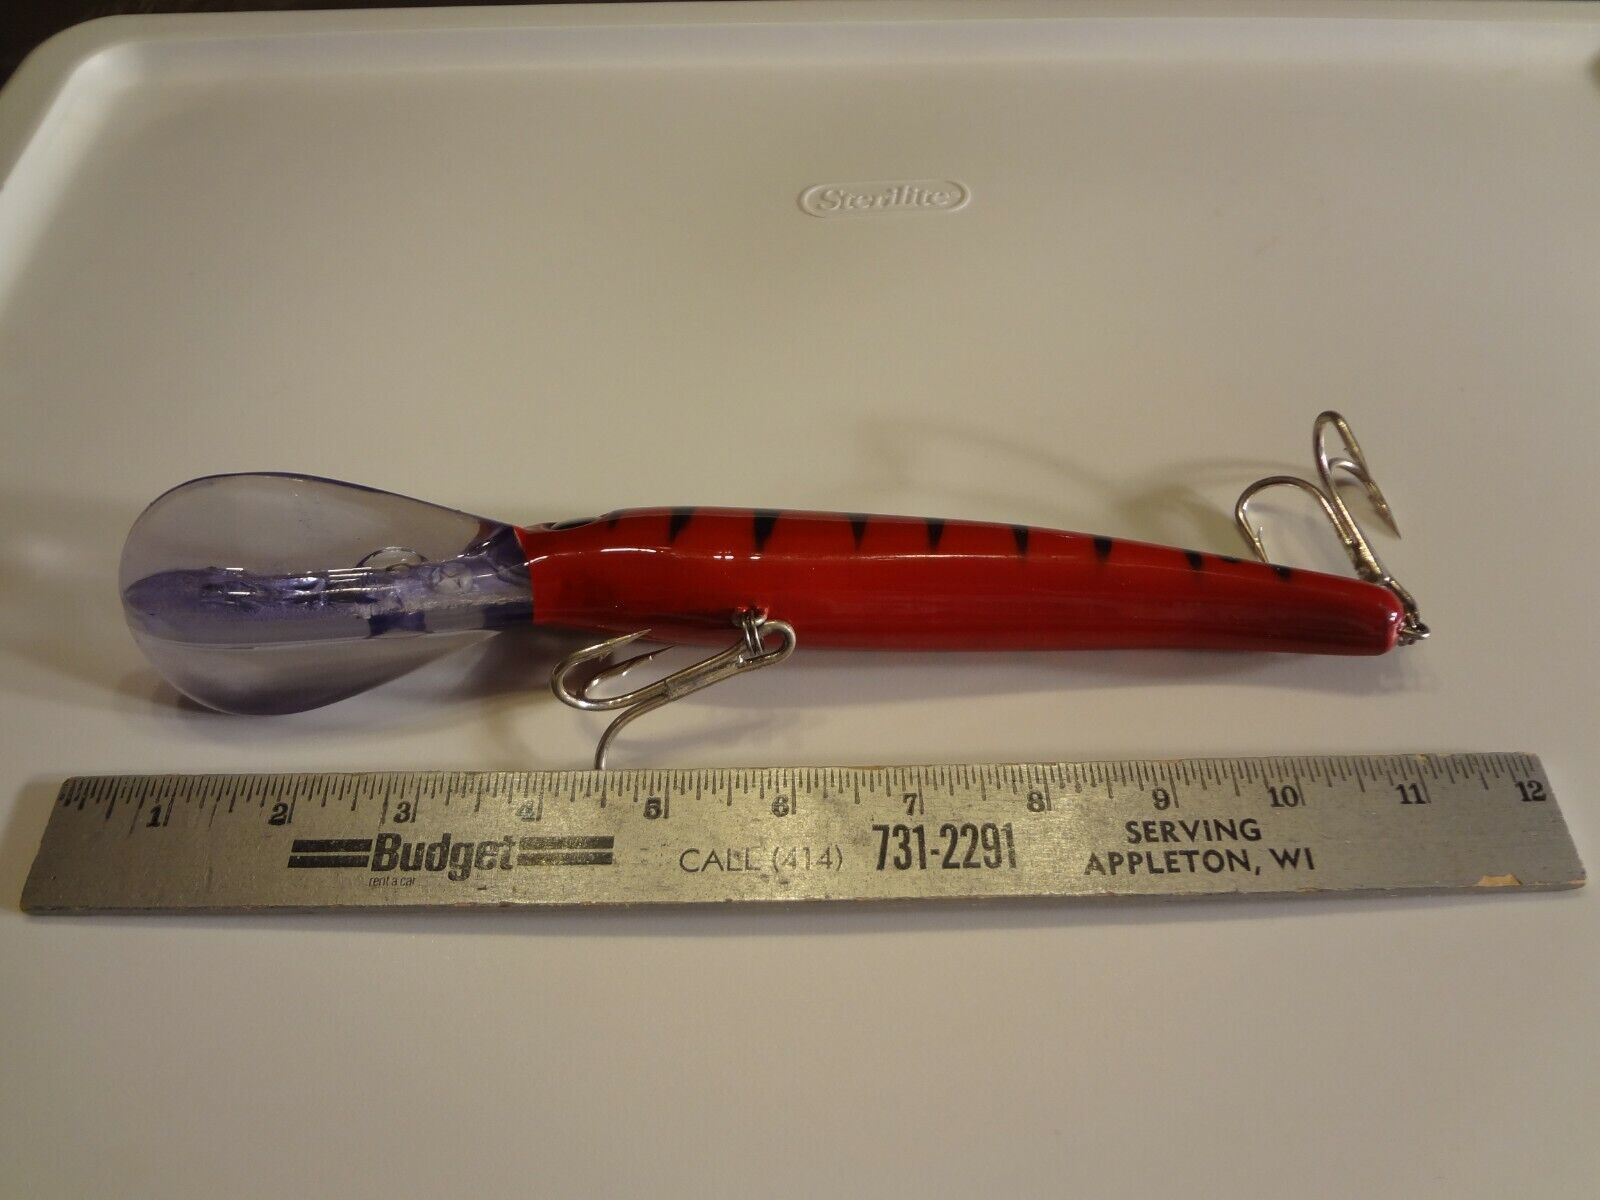 Muske Musky Fishing Lure - Manns stretch Saltwater